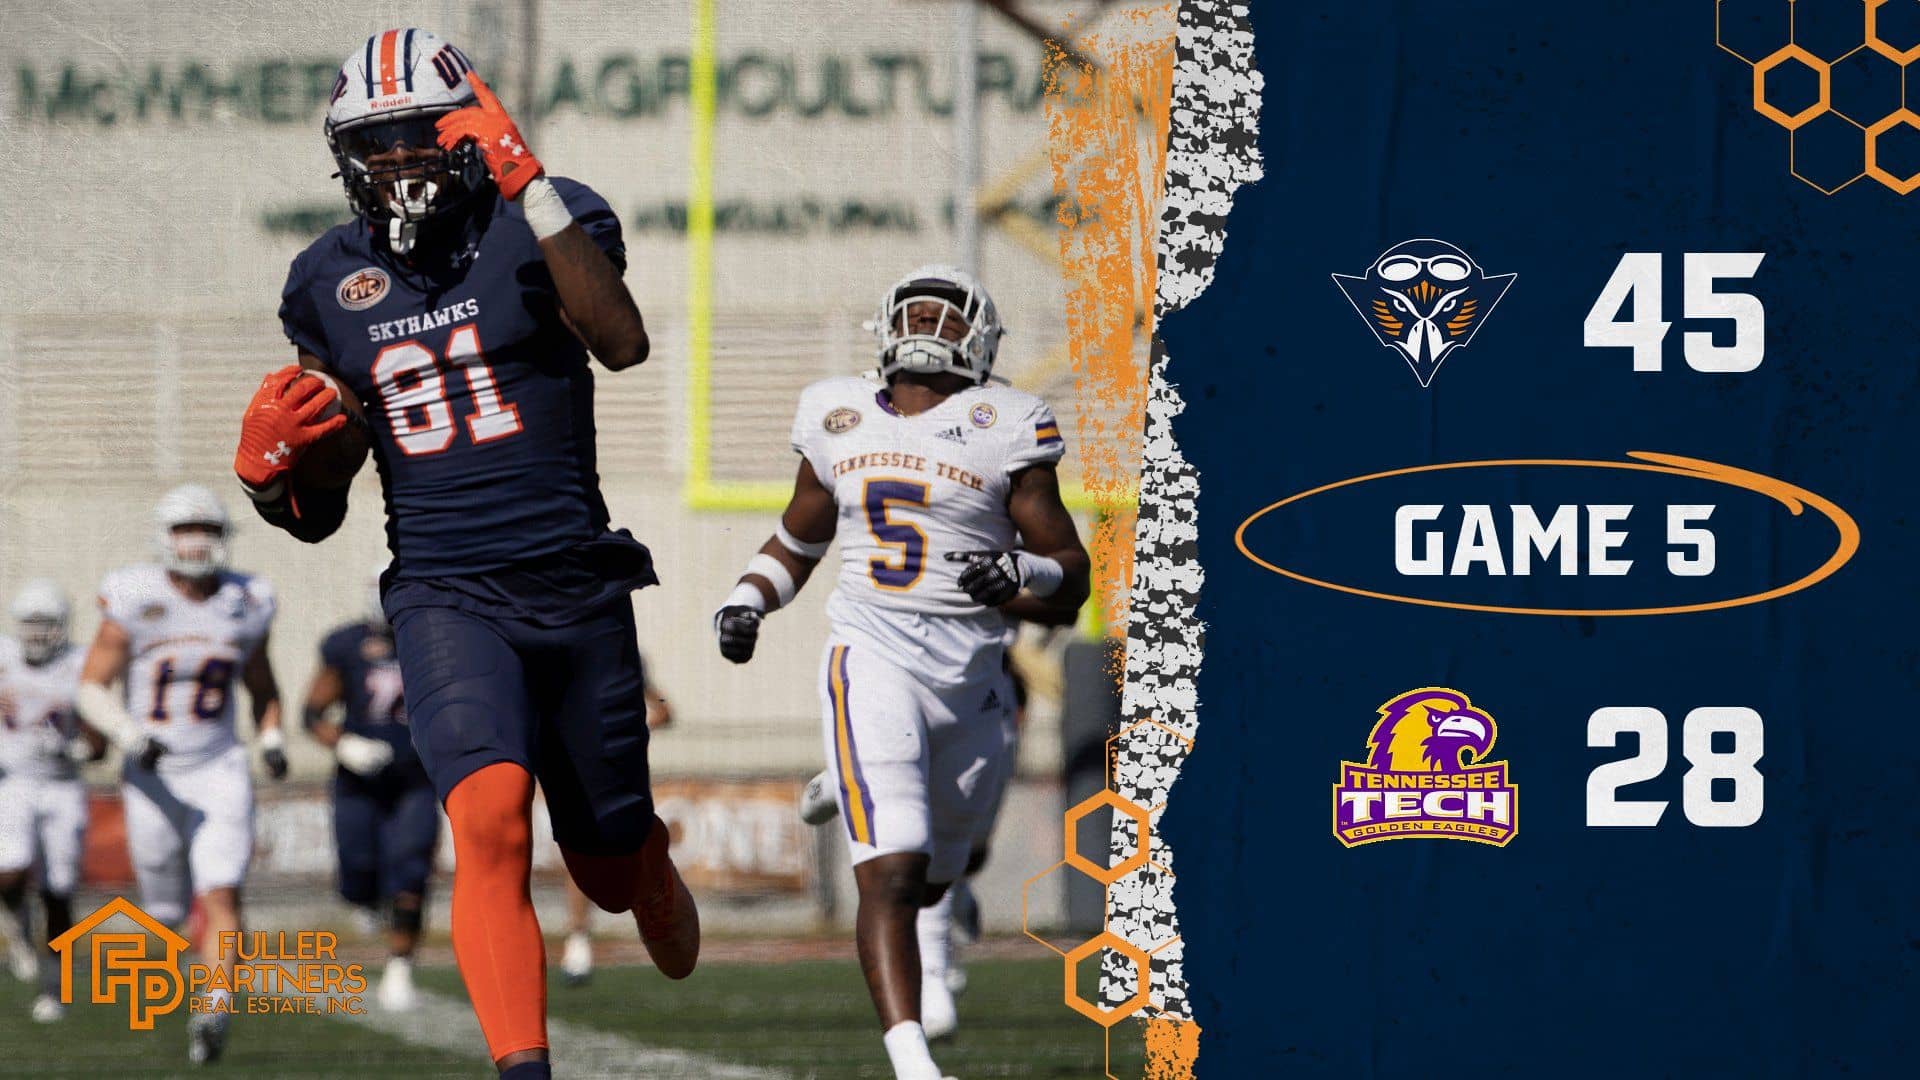 UT Martin Football Cruises to 4528 Win Over Tennessee Tech